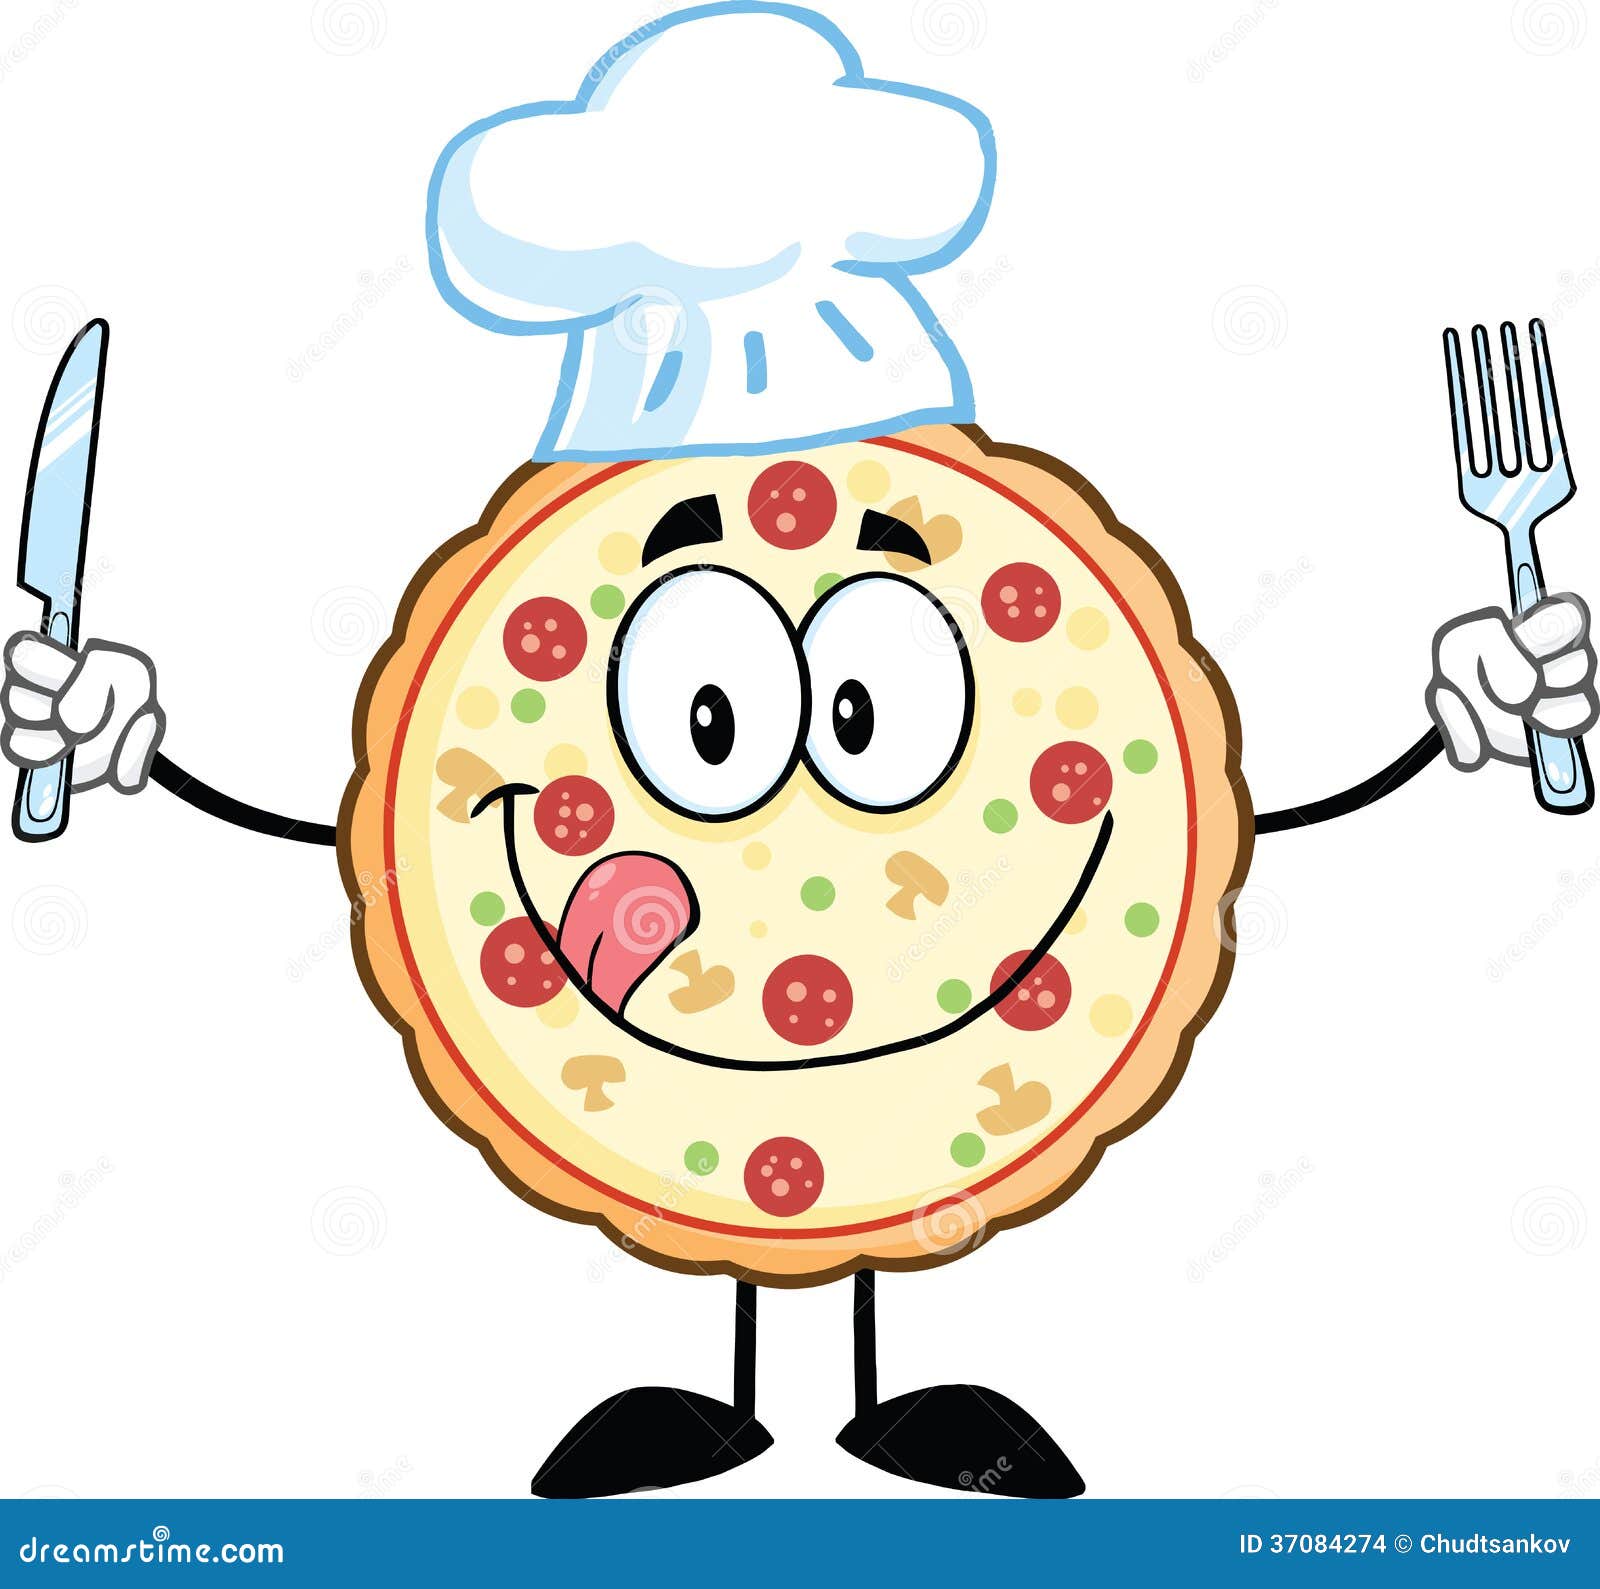 pizza character clipart - photo #48